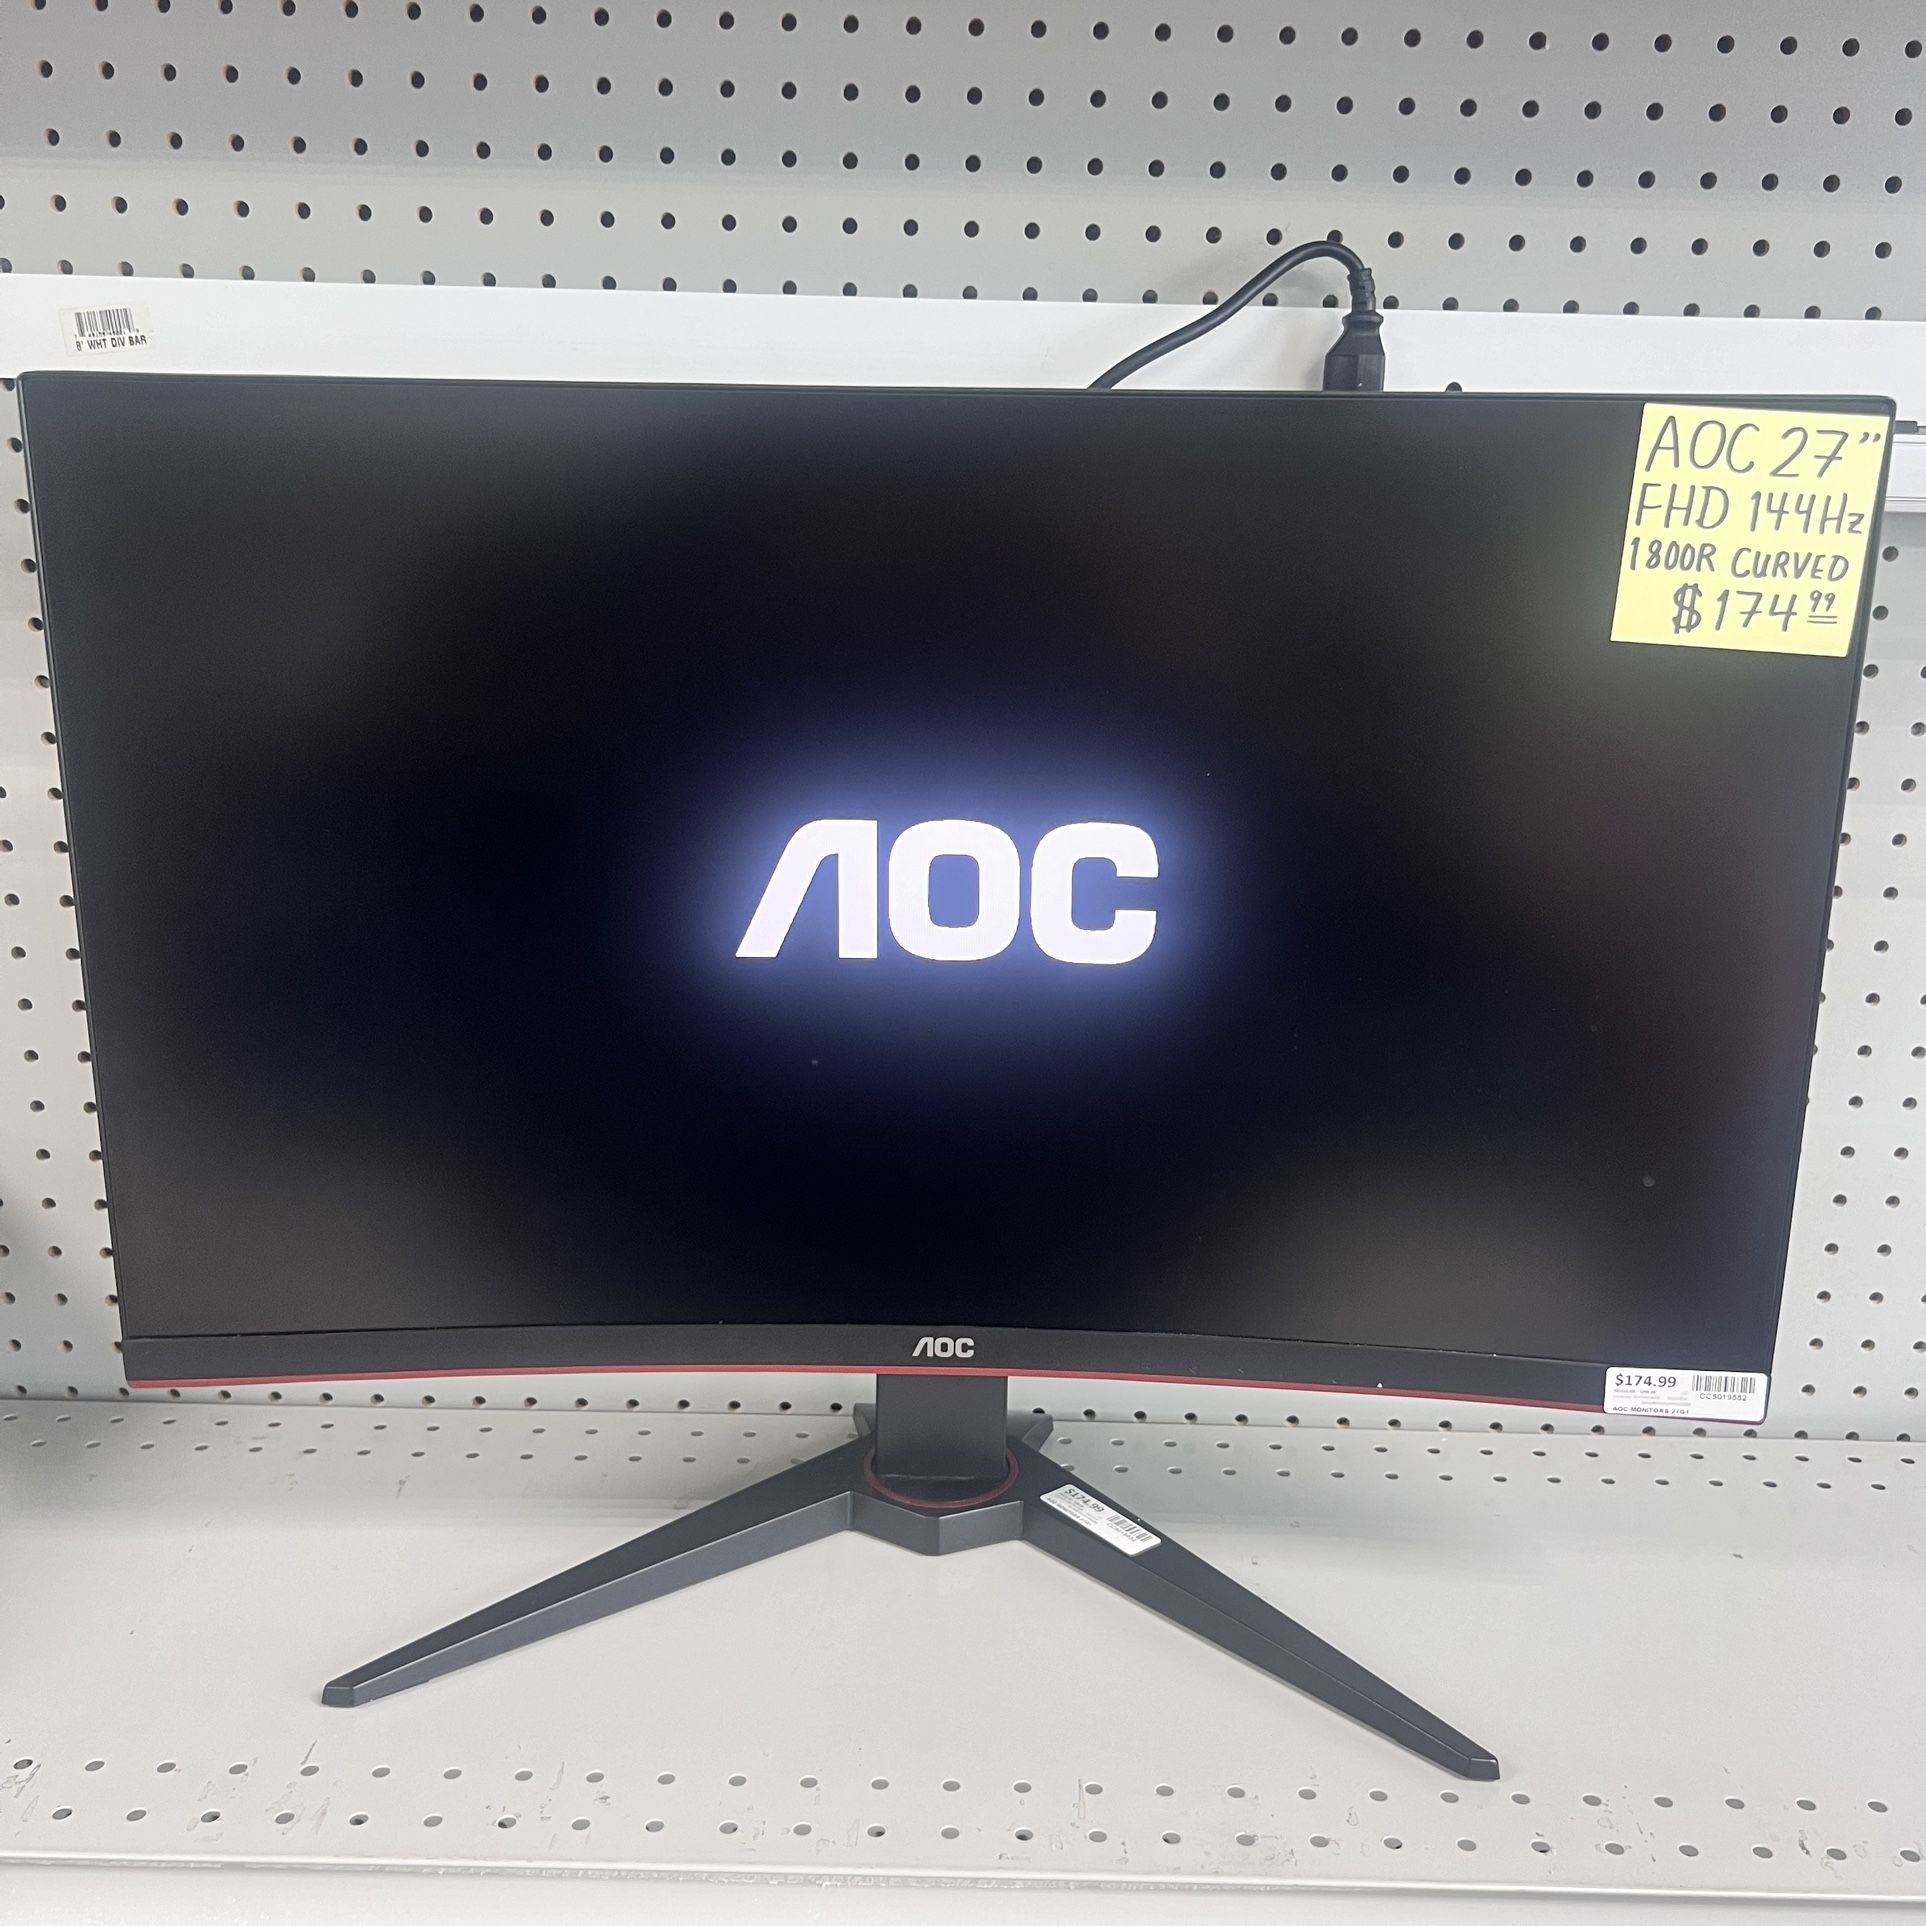 AOC 27” CURVED FHD 144HZ GAMING MONITOR